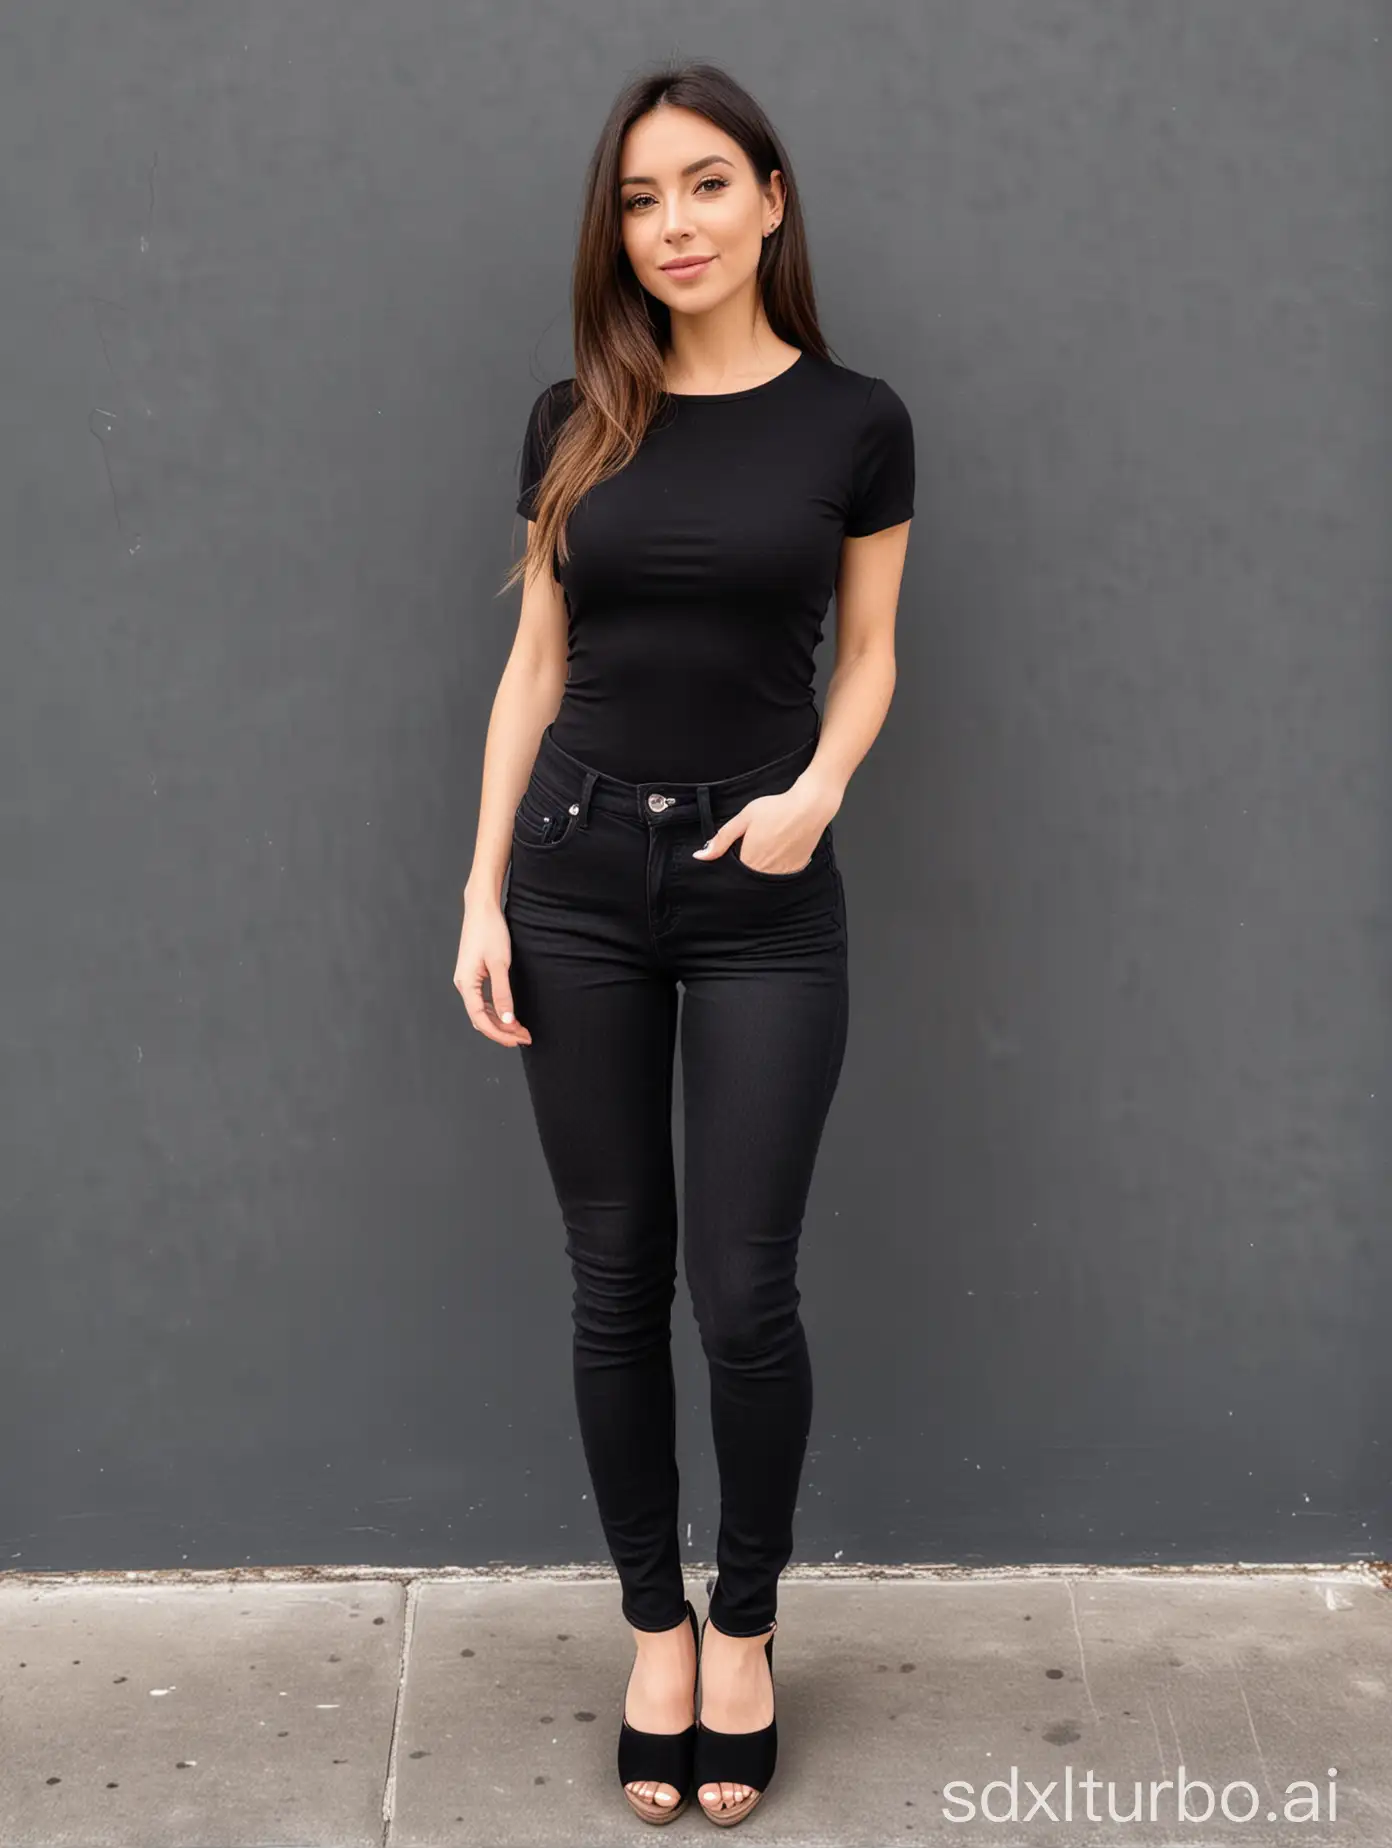 Stylish-Petite-Woman-in-Black-Top-and-Skinny-Jeans